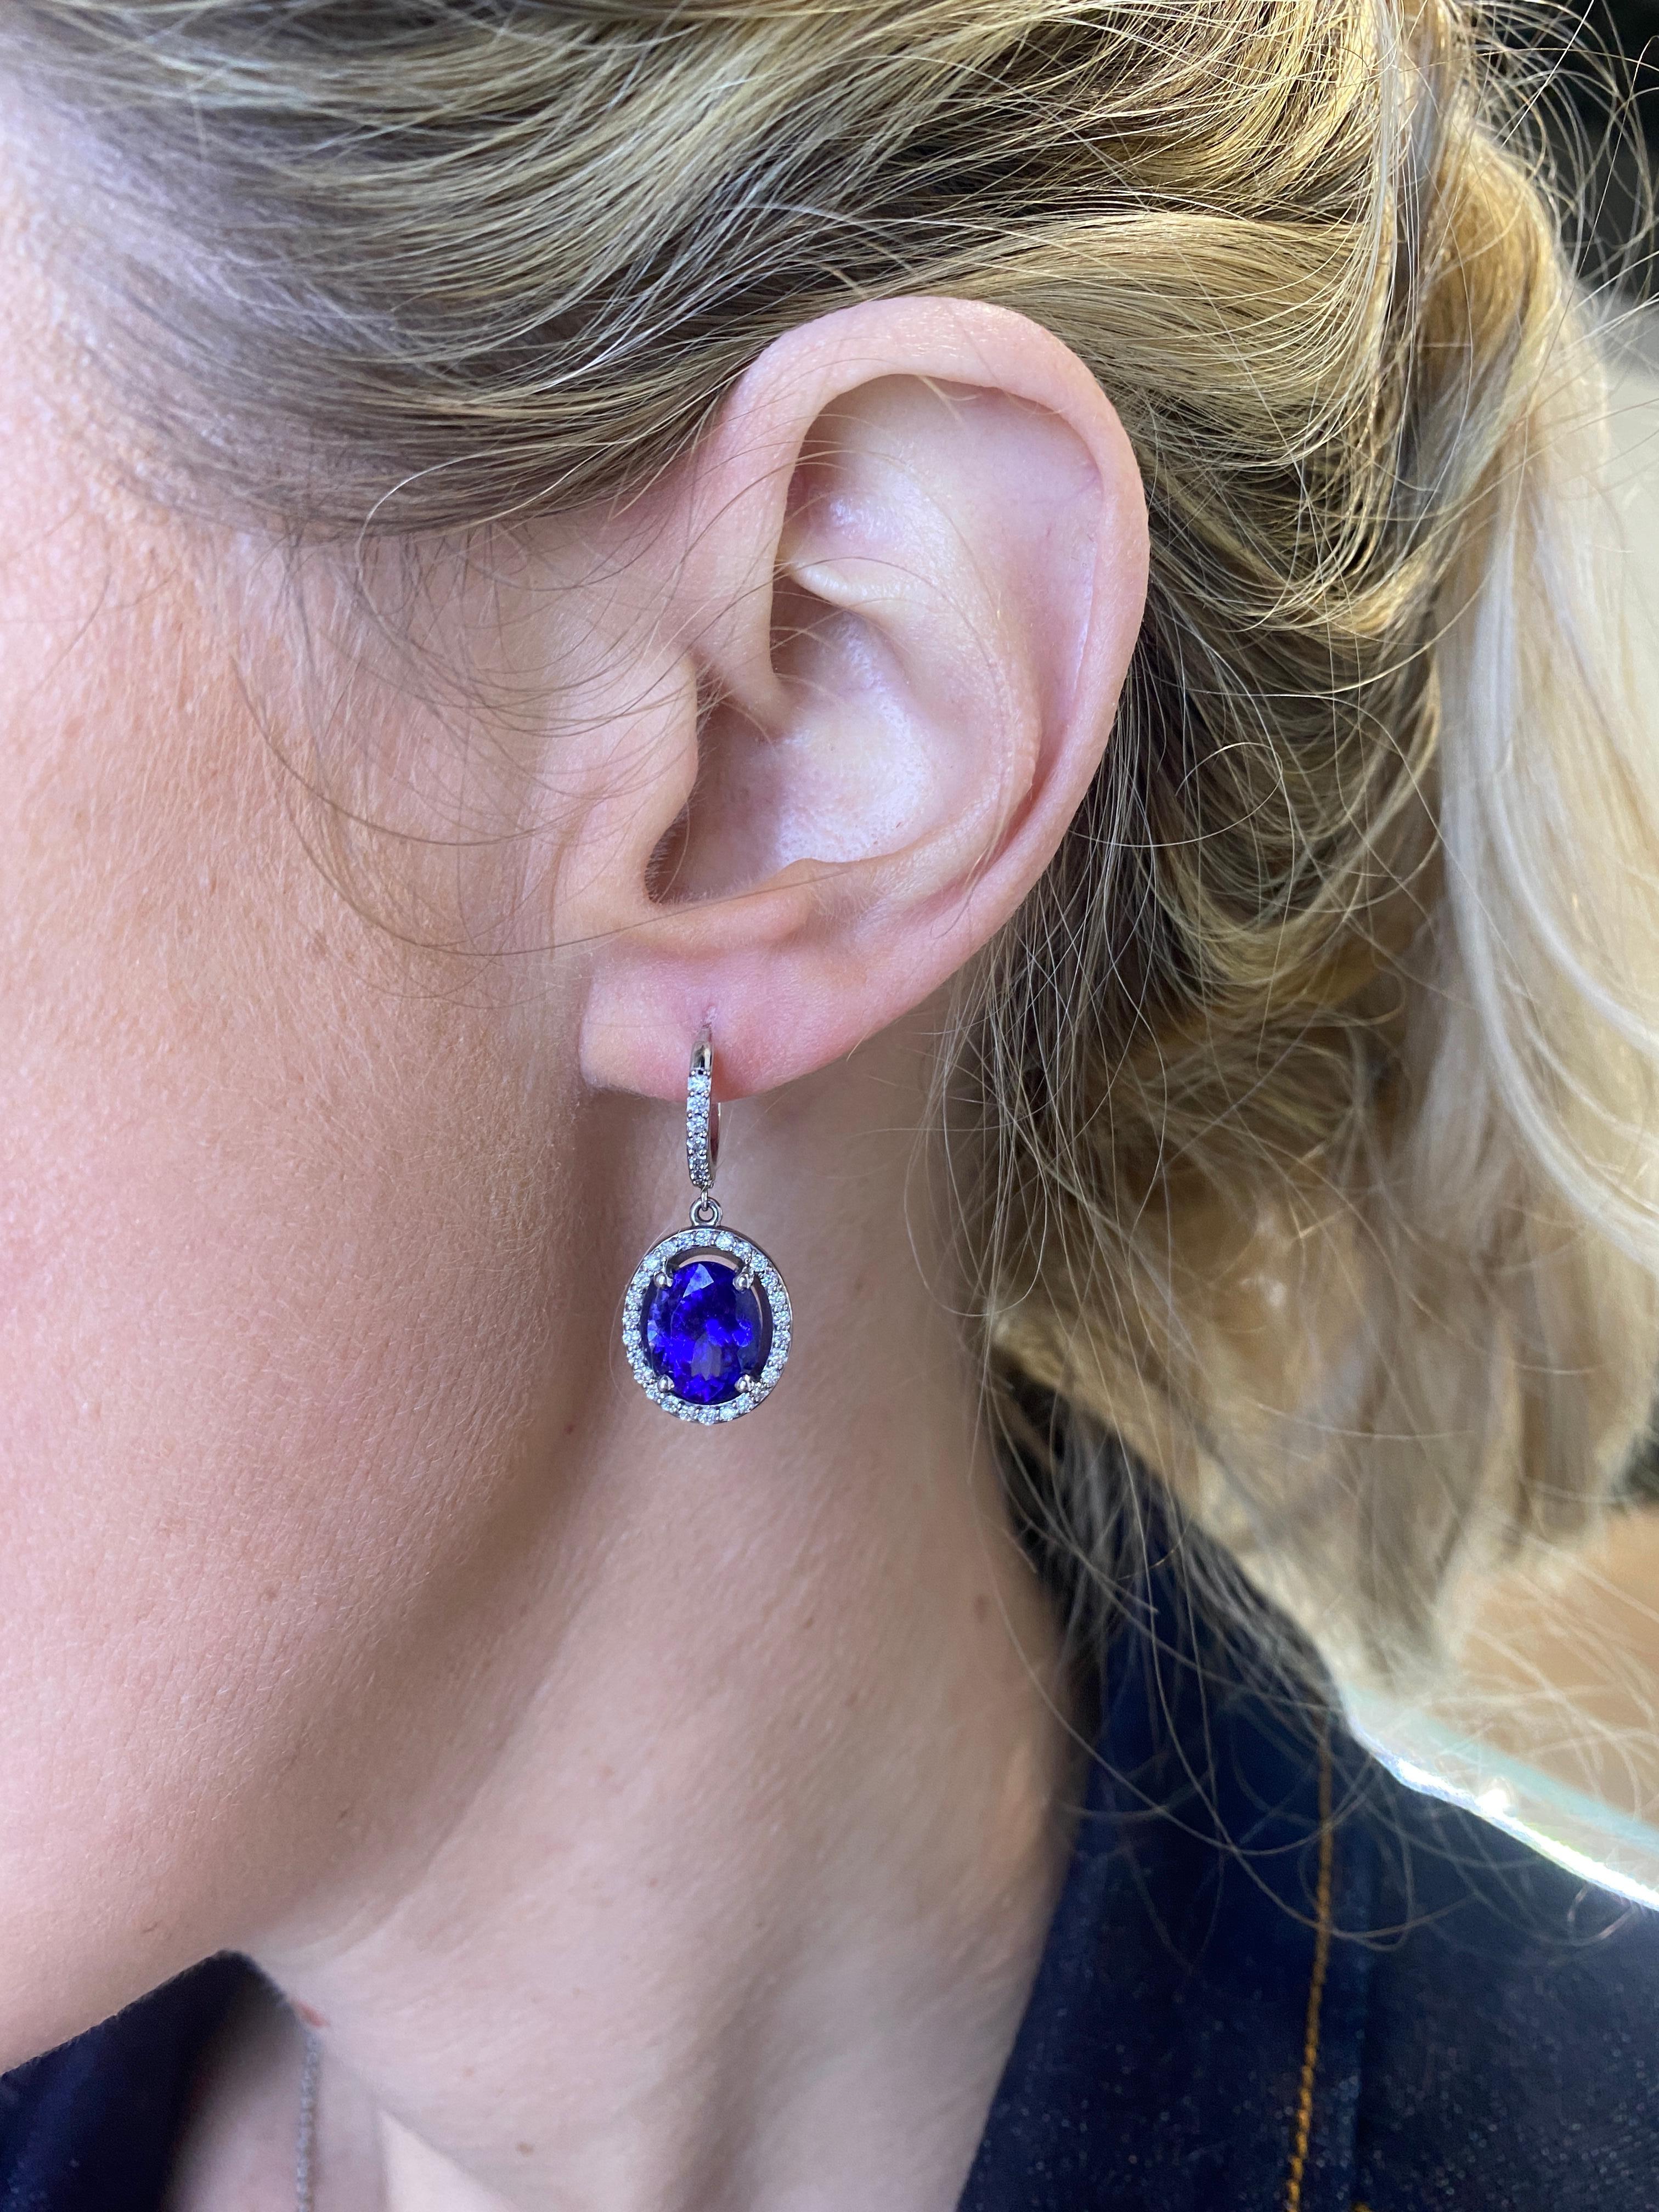 These drop earrings feature 7.68 carat total weight in oval Tanzanites accented by a halo of 0.43 carat total weight in round diamonds set in 14 karat white gold.
Measurements: Approximately 30mm in length.